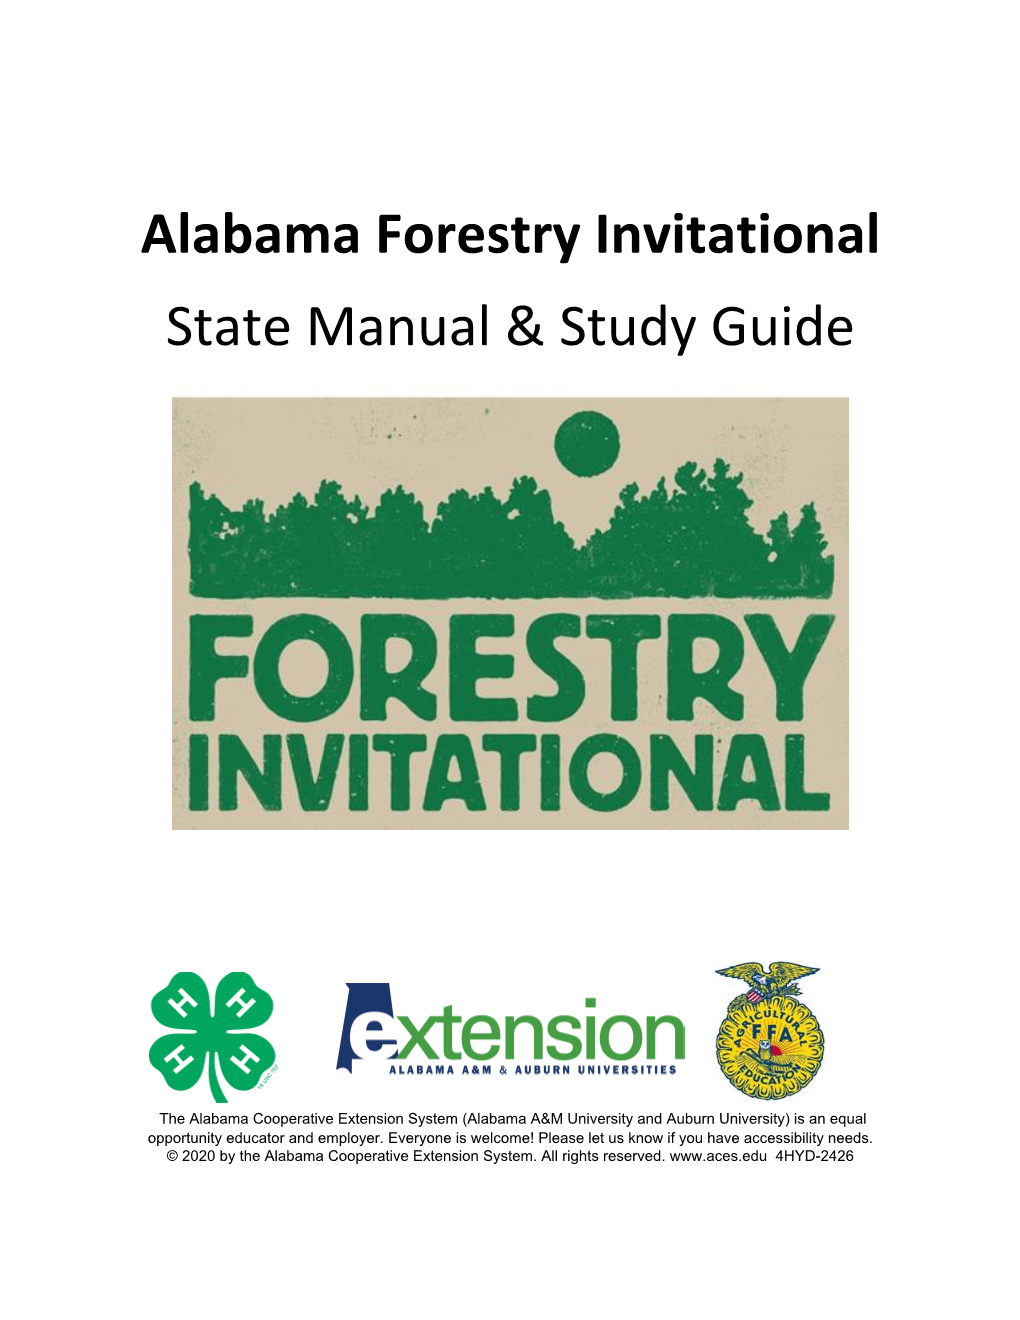 Alabama Forestry Invitational State Manual & Study Guide